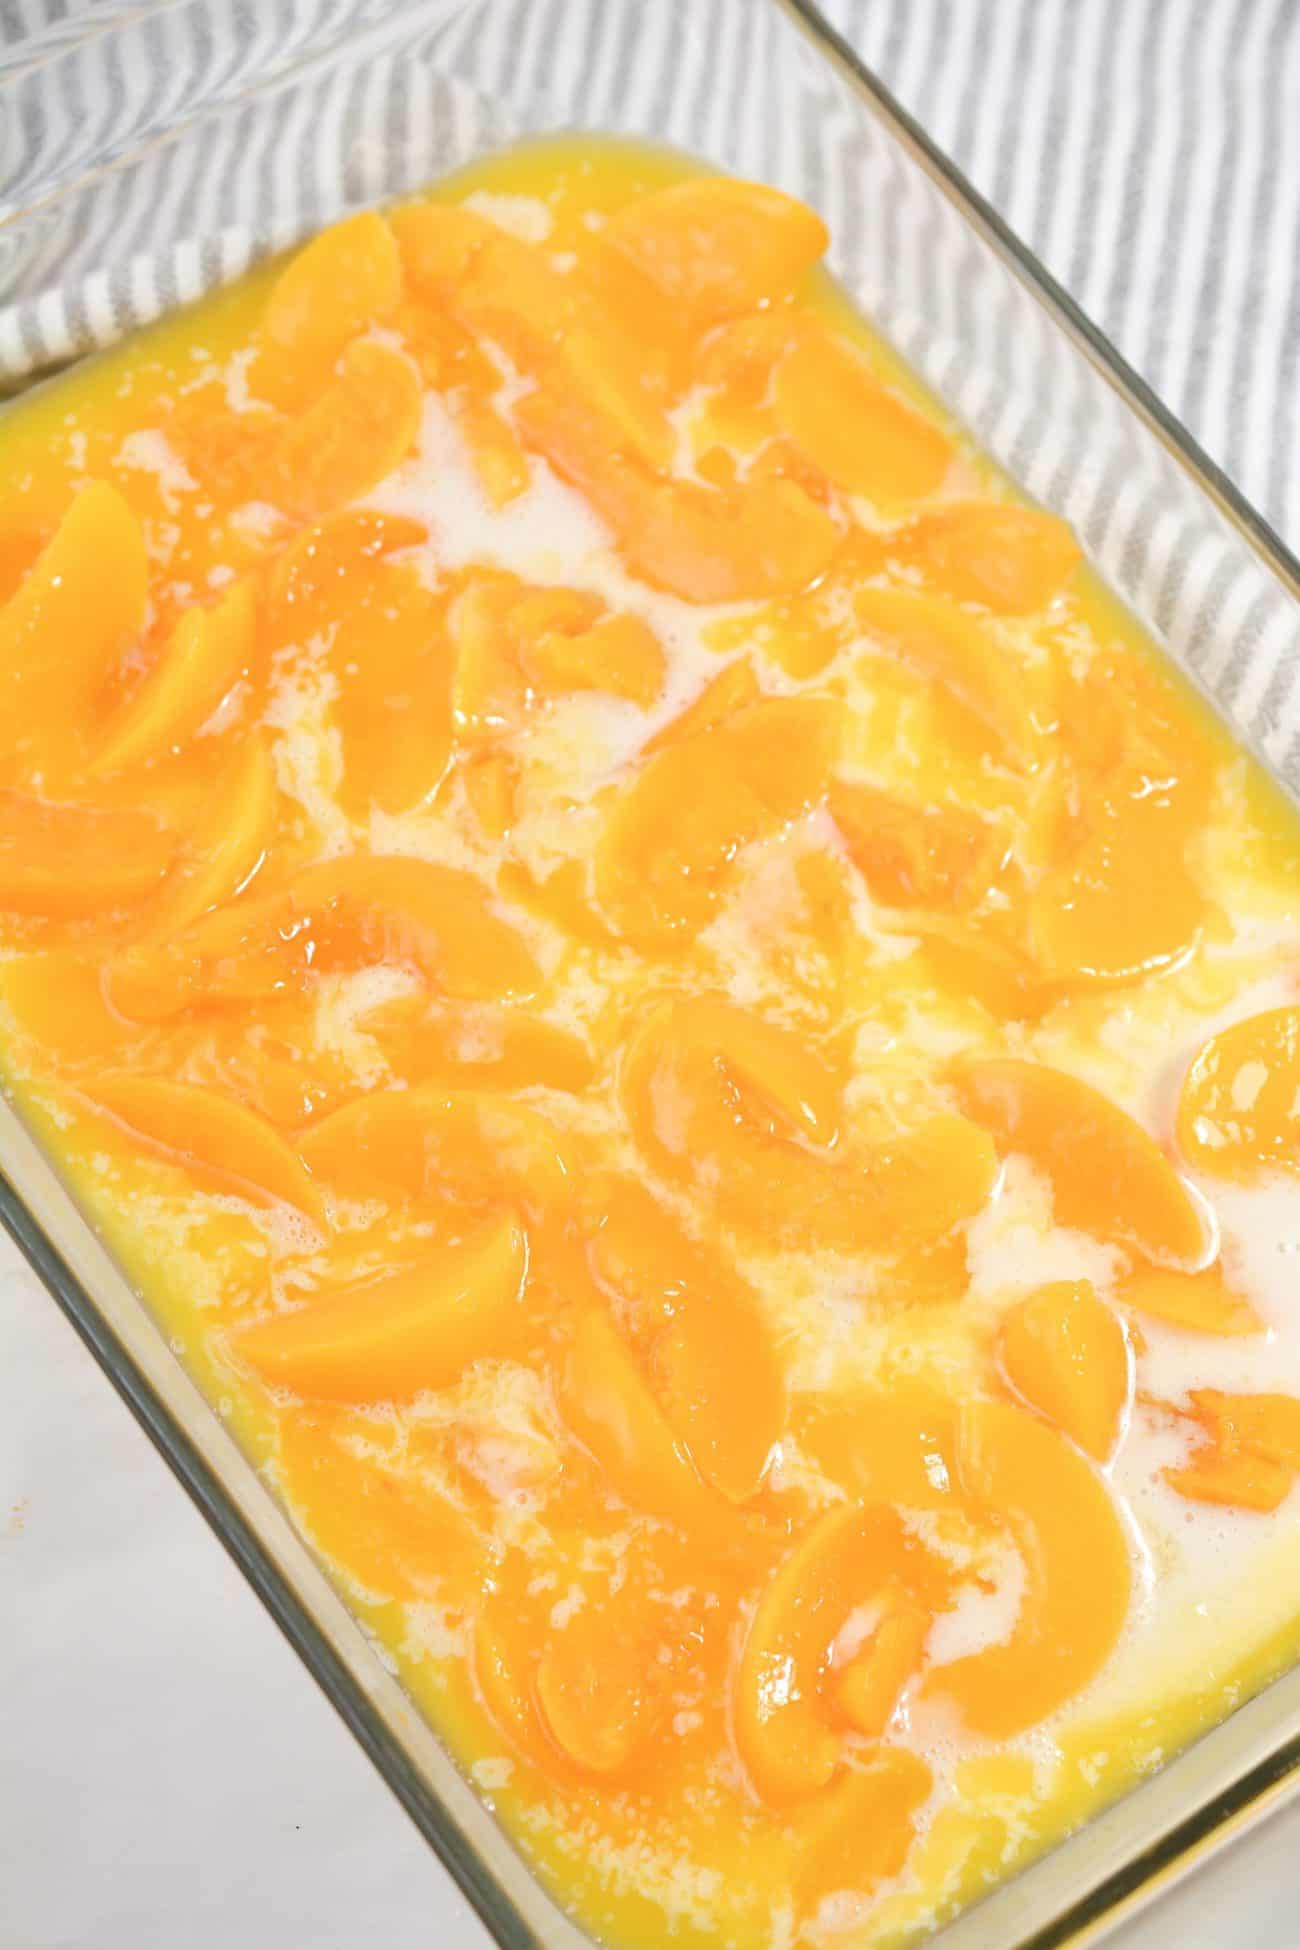 Layer the peach slices on top of the mixture in the dish.